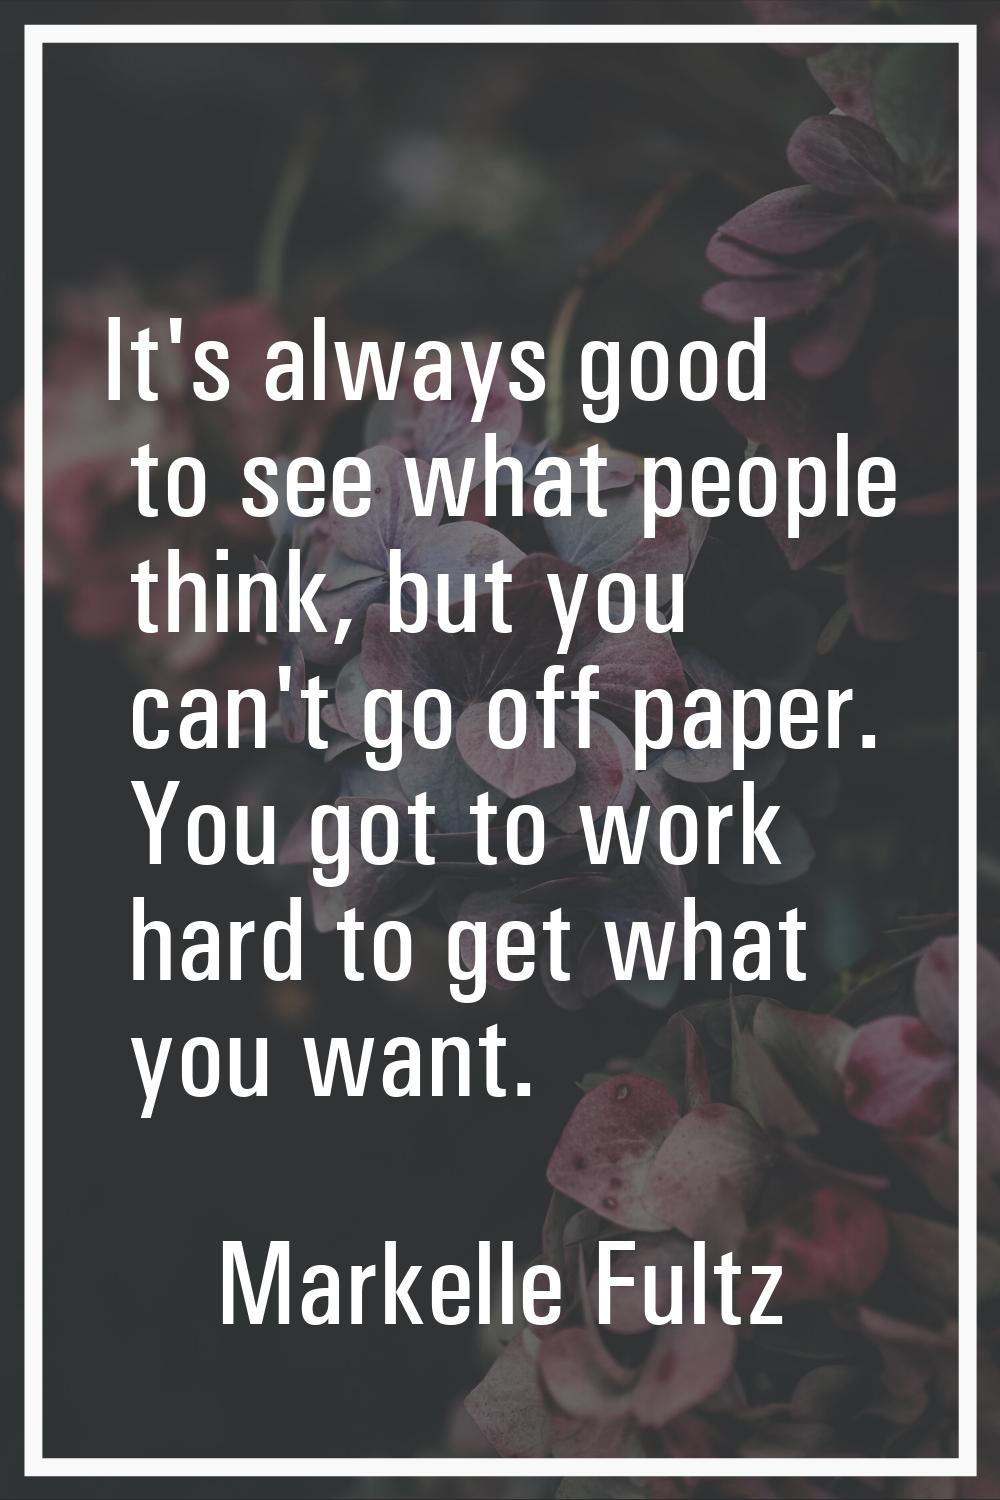 It's always good to see what people think, but you can't go off paper. You got to work hard to get 